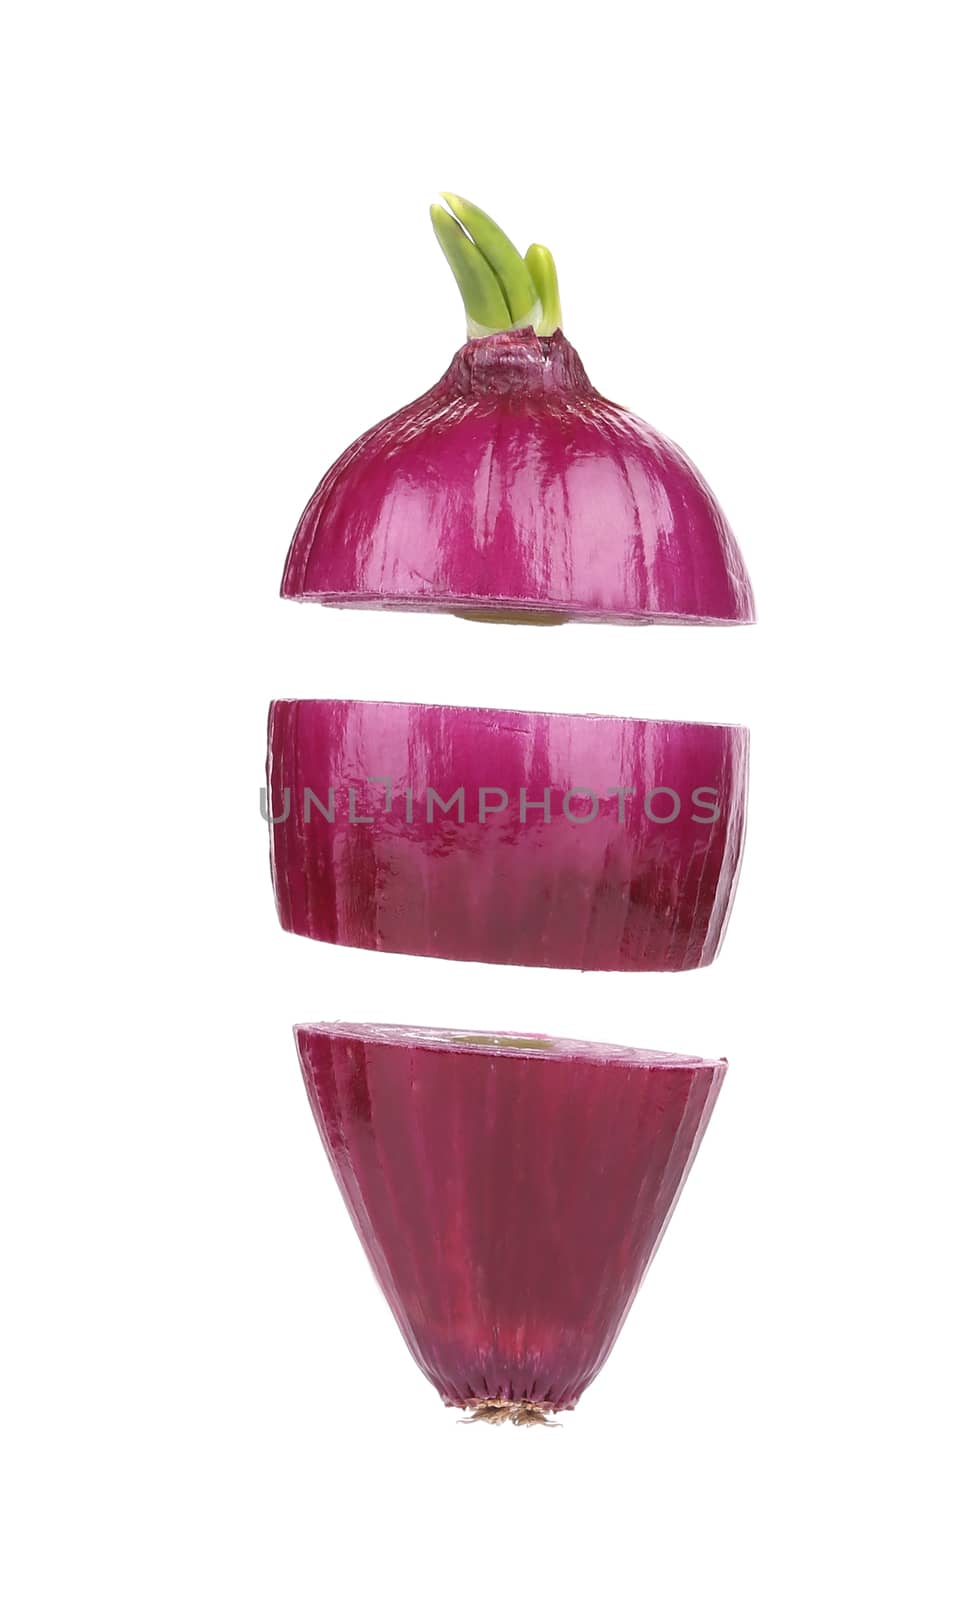 One red cut onion. by indigolotos